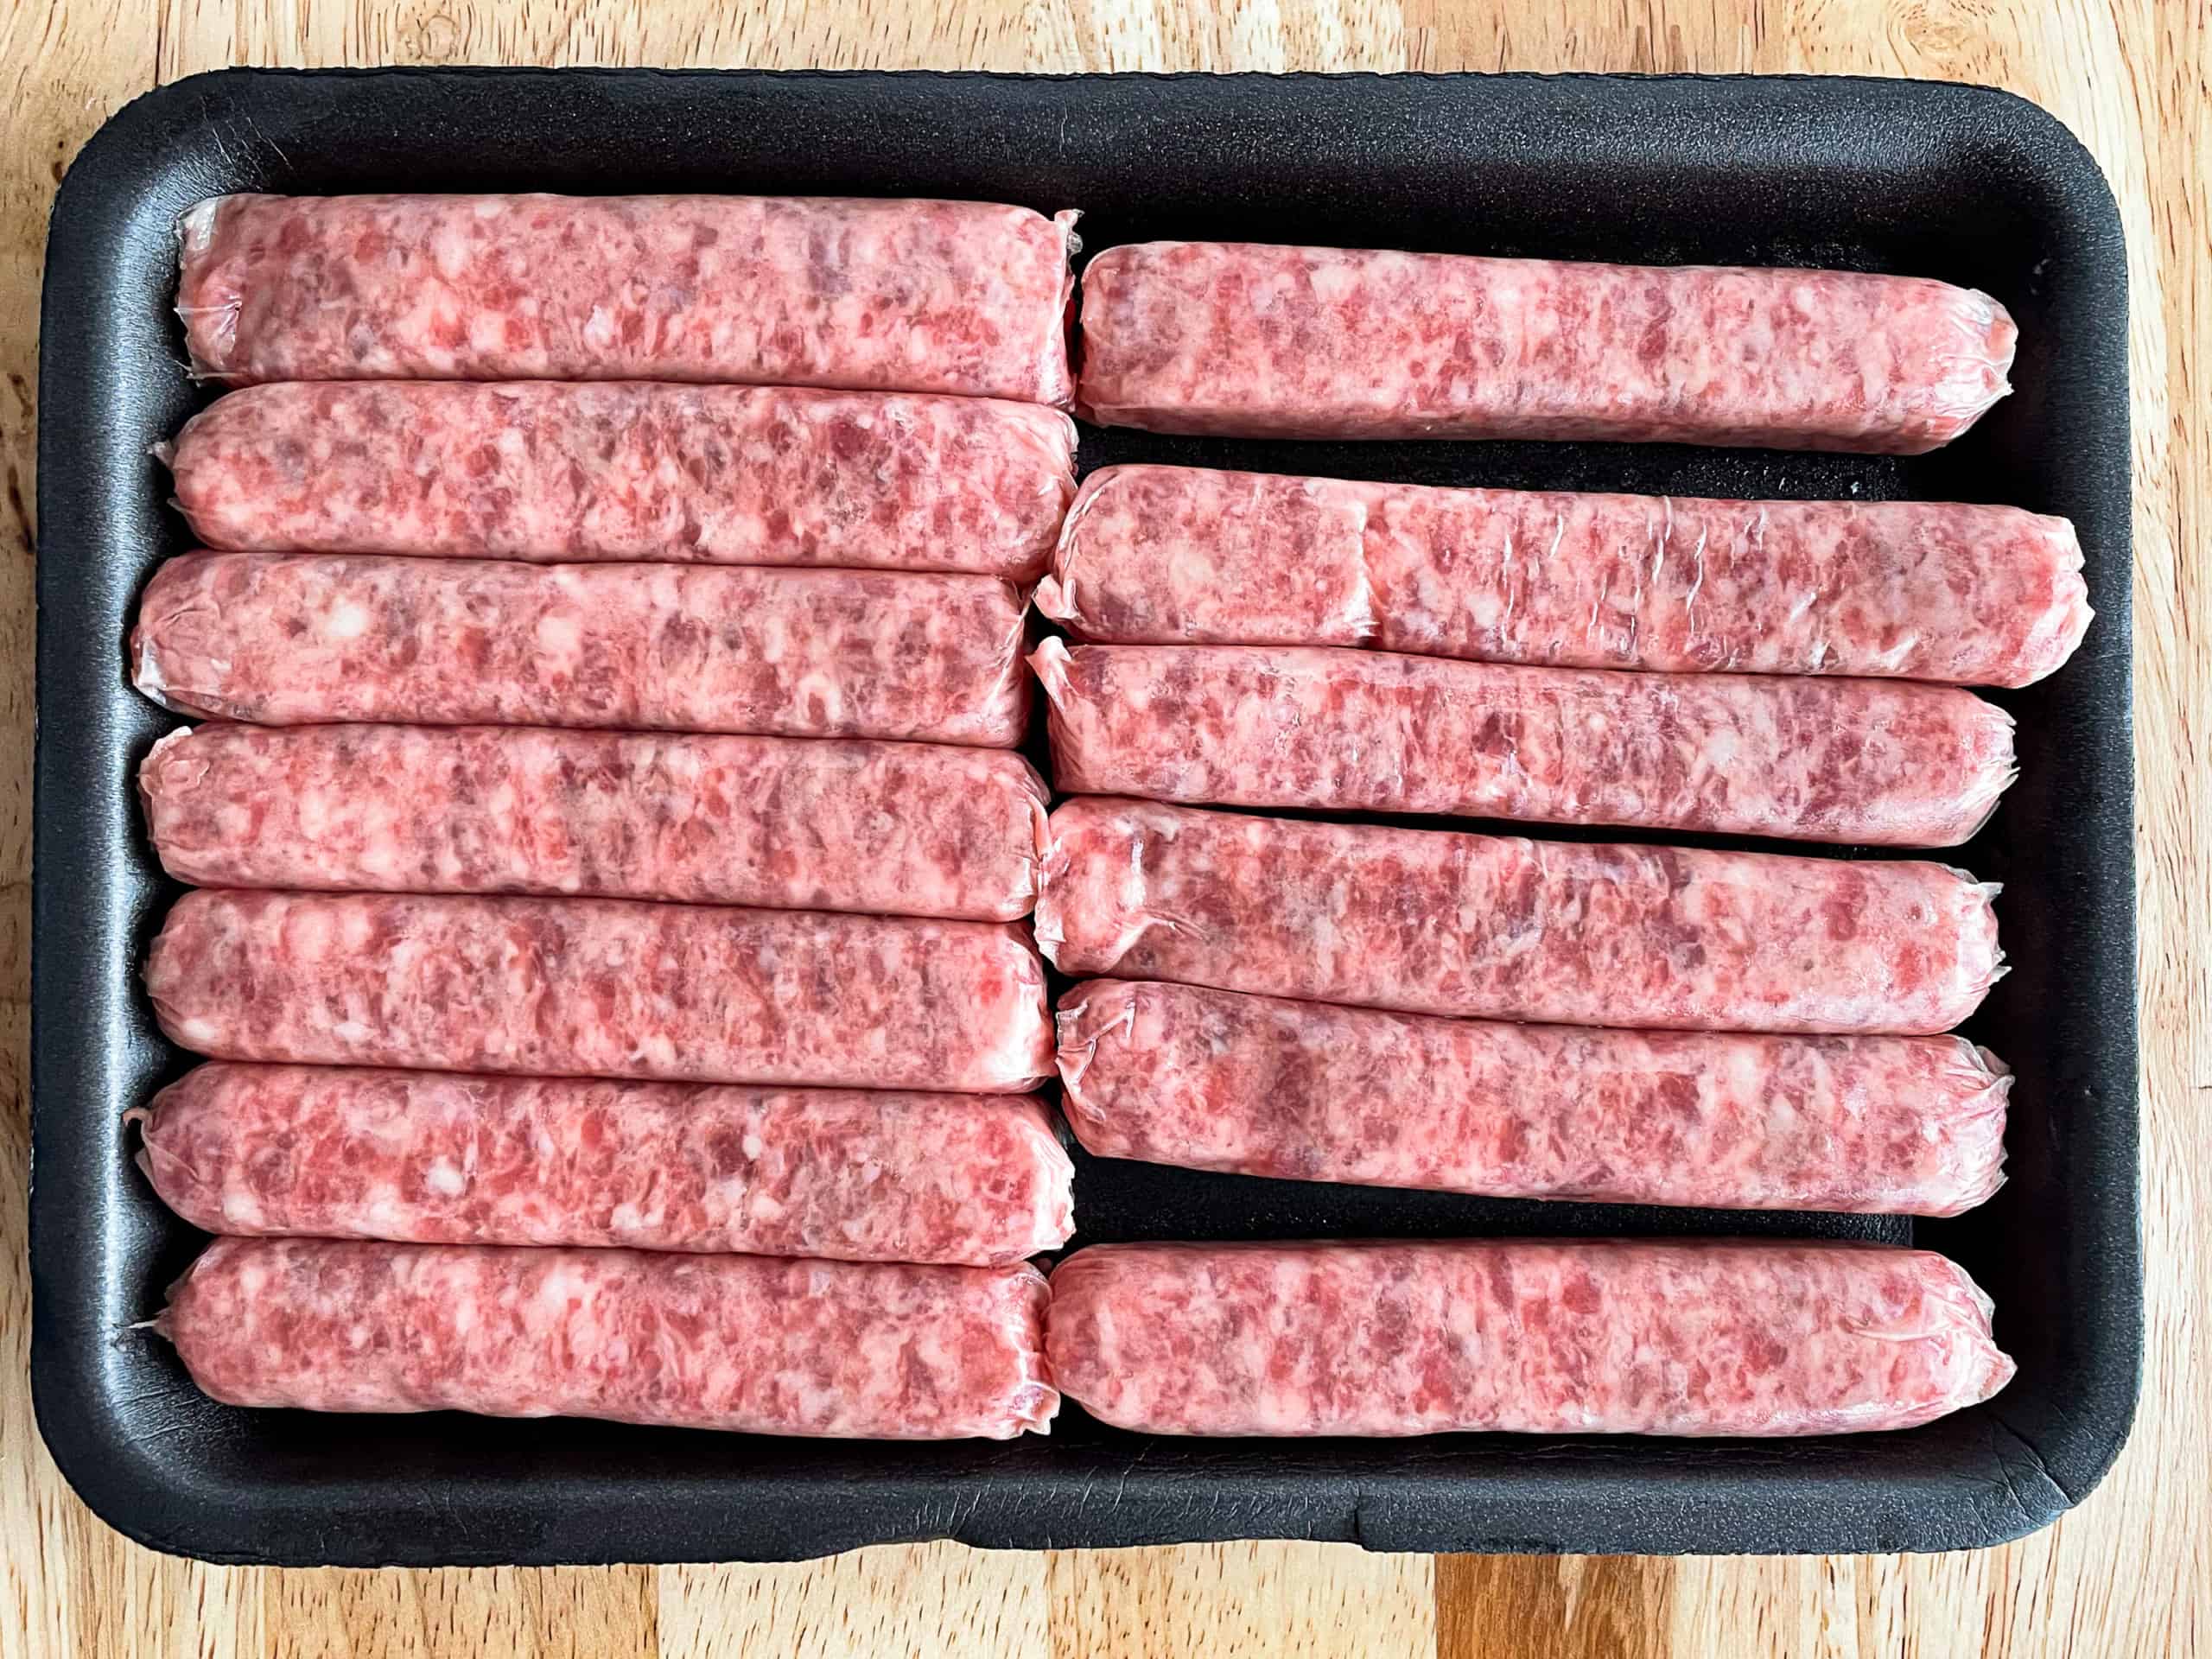 Fresh, uncooked breakfast sausage links on a black tray.